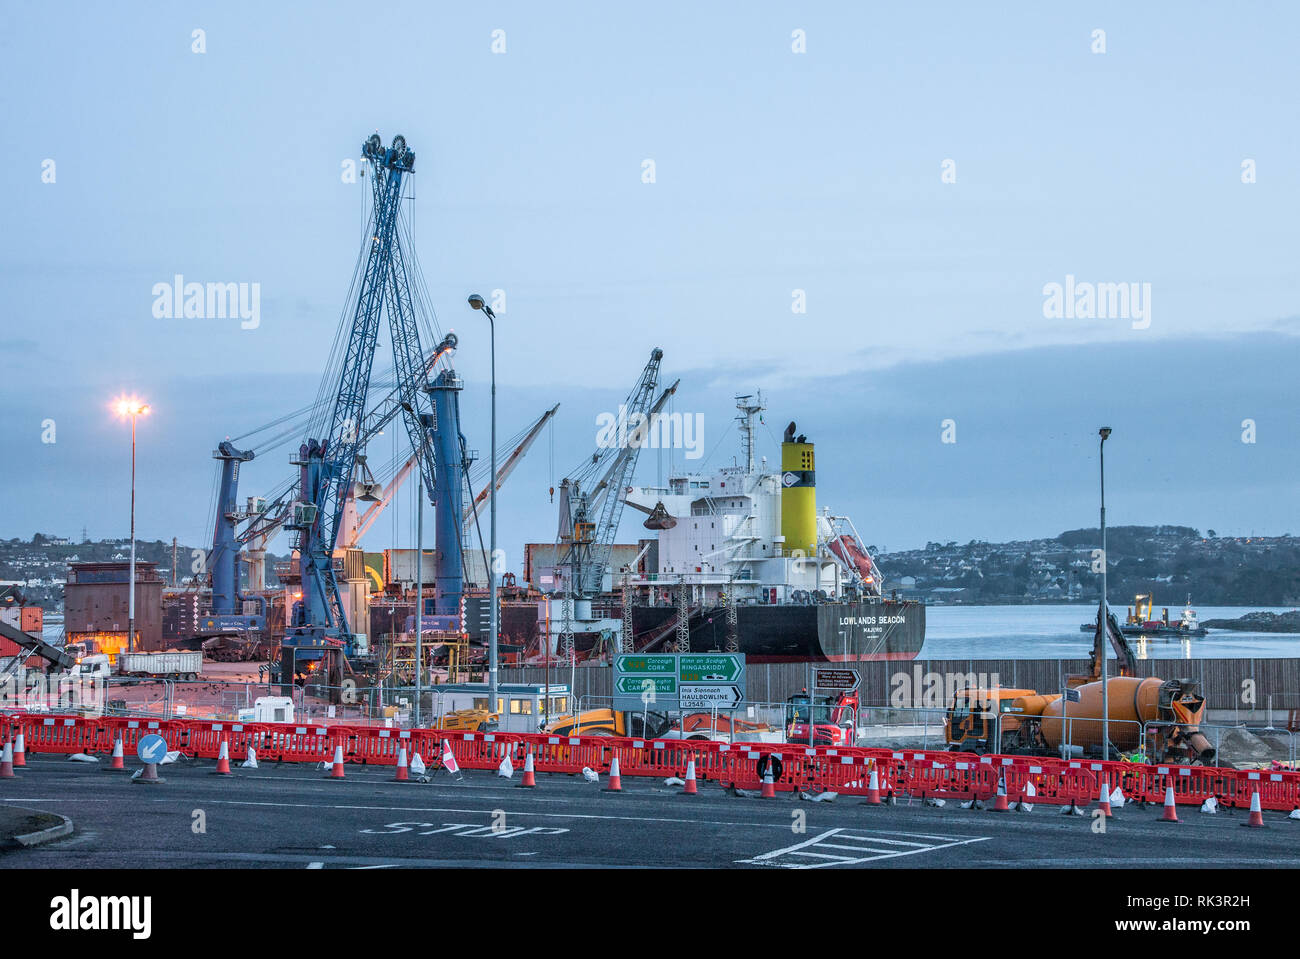 Ringaskiddy, Cork, Ireland. 09-02-2019. Bulk Carrier Lowlands Beacon unloads feedstuff from Agentina while construction continues on the redevelopment of the port at Ringaskiddy which will consist of a new container terminal and multi-purpose berth. Credit: David Creedon/Alamy Live News Stock Photo